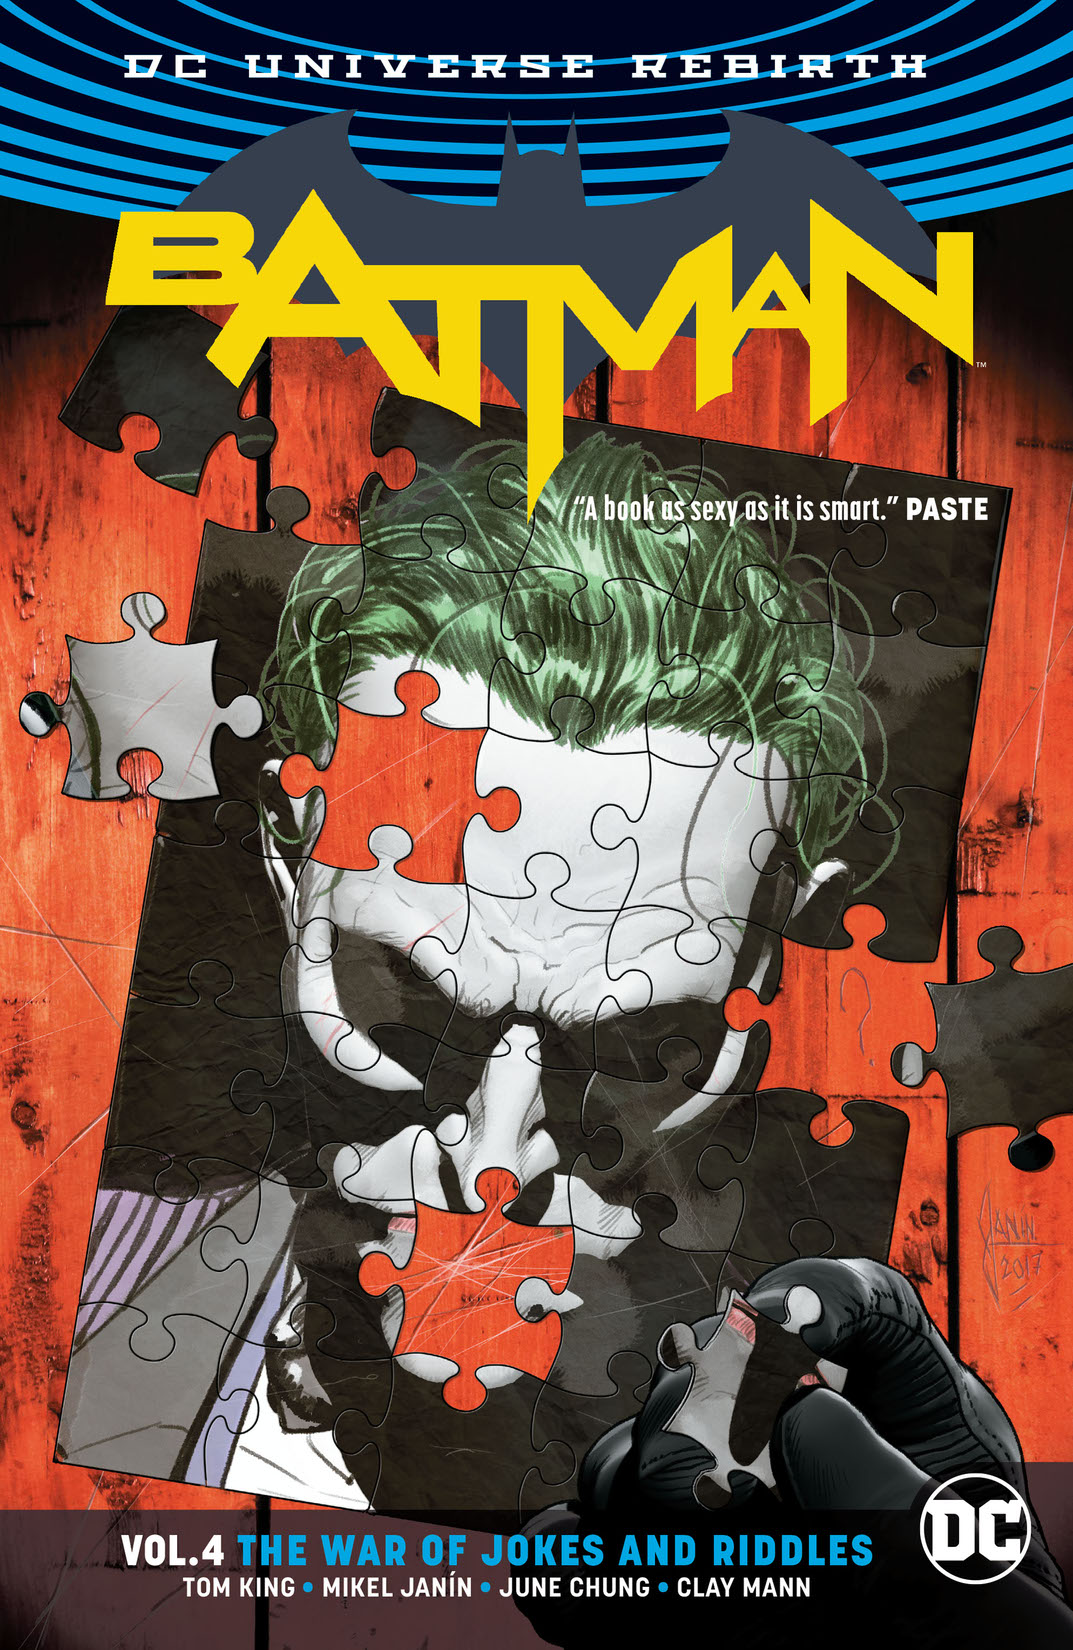 Batman Vol. 4: The War of Jokes and Riddles preview images